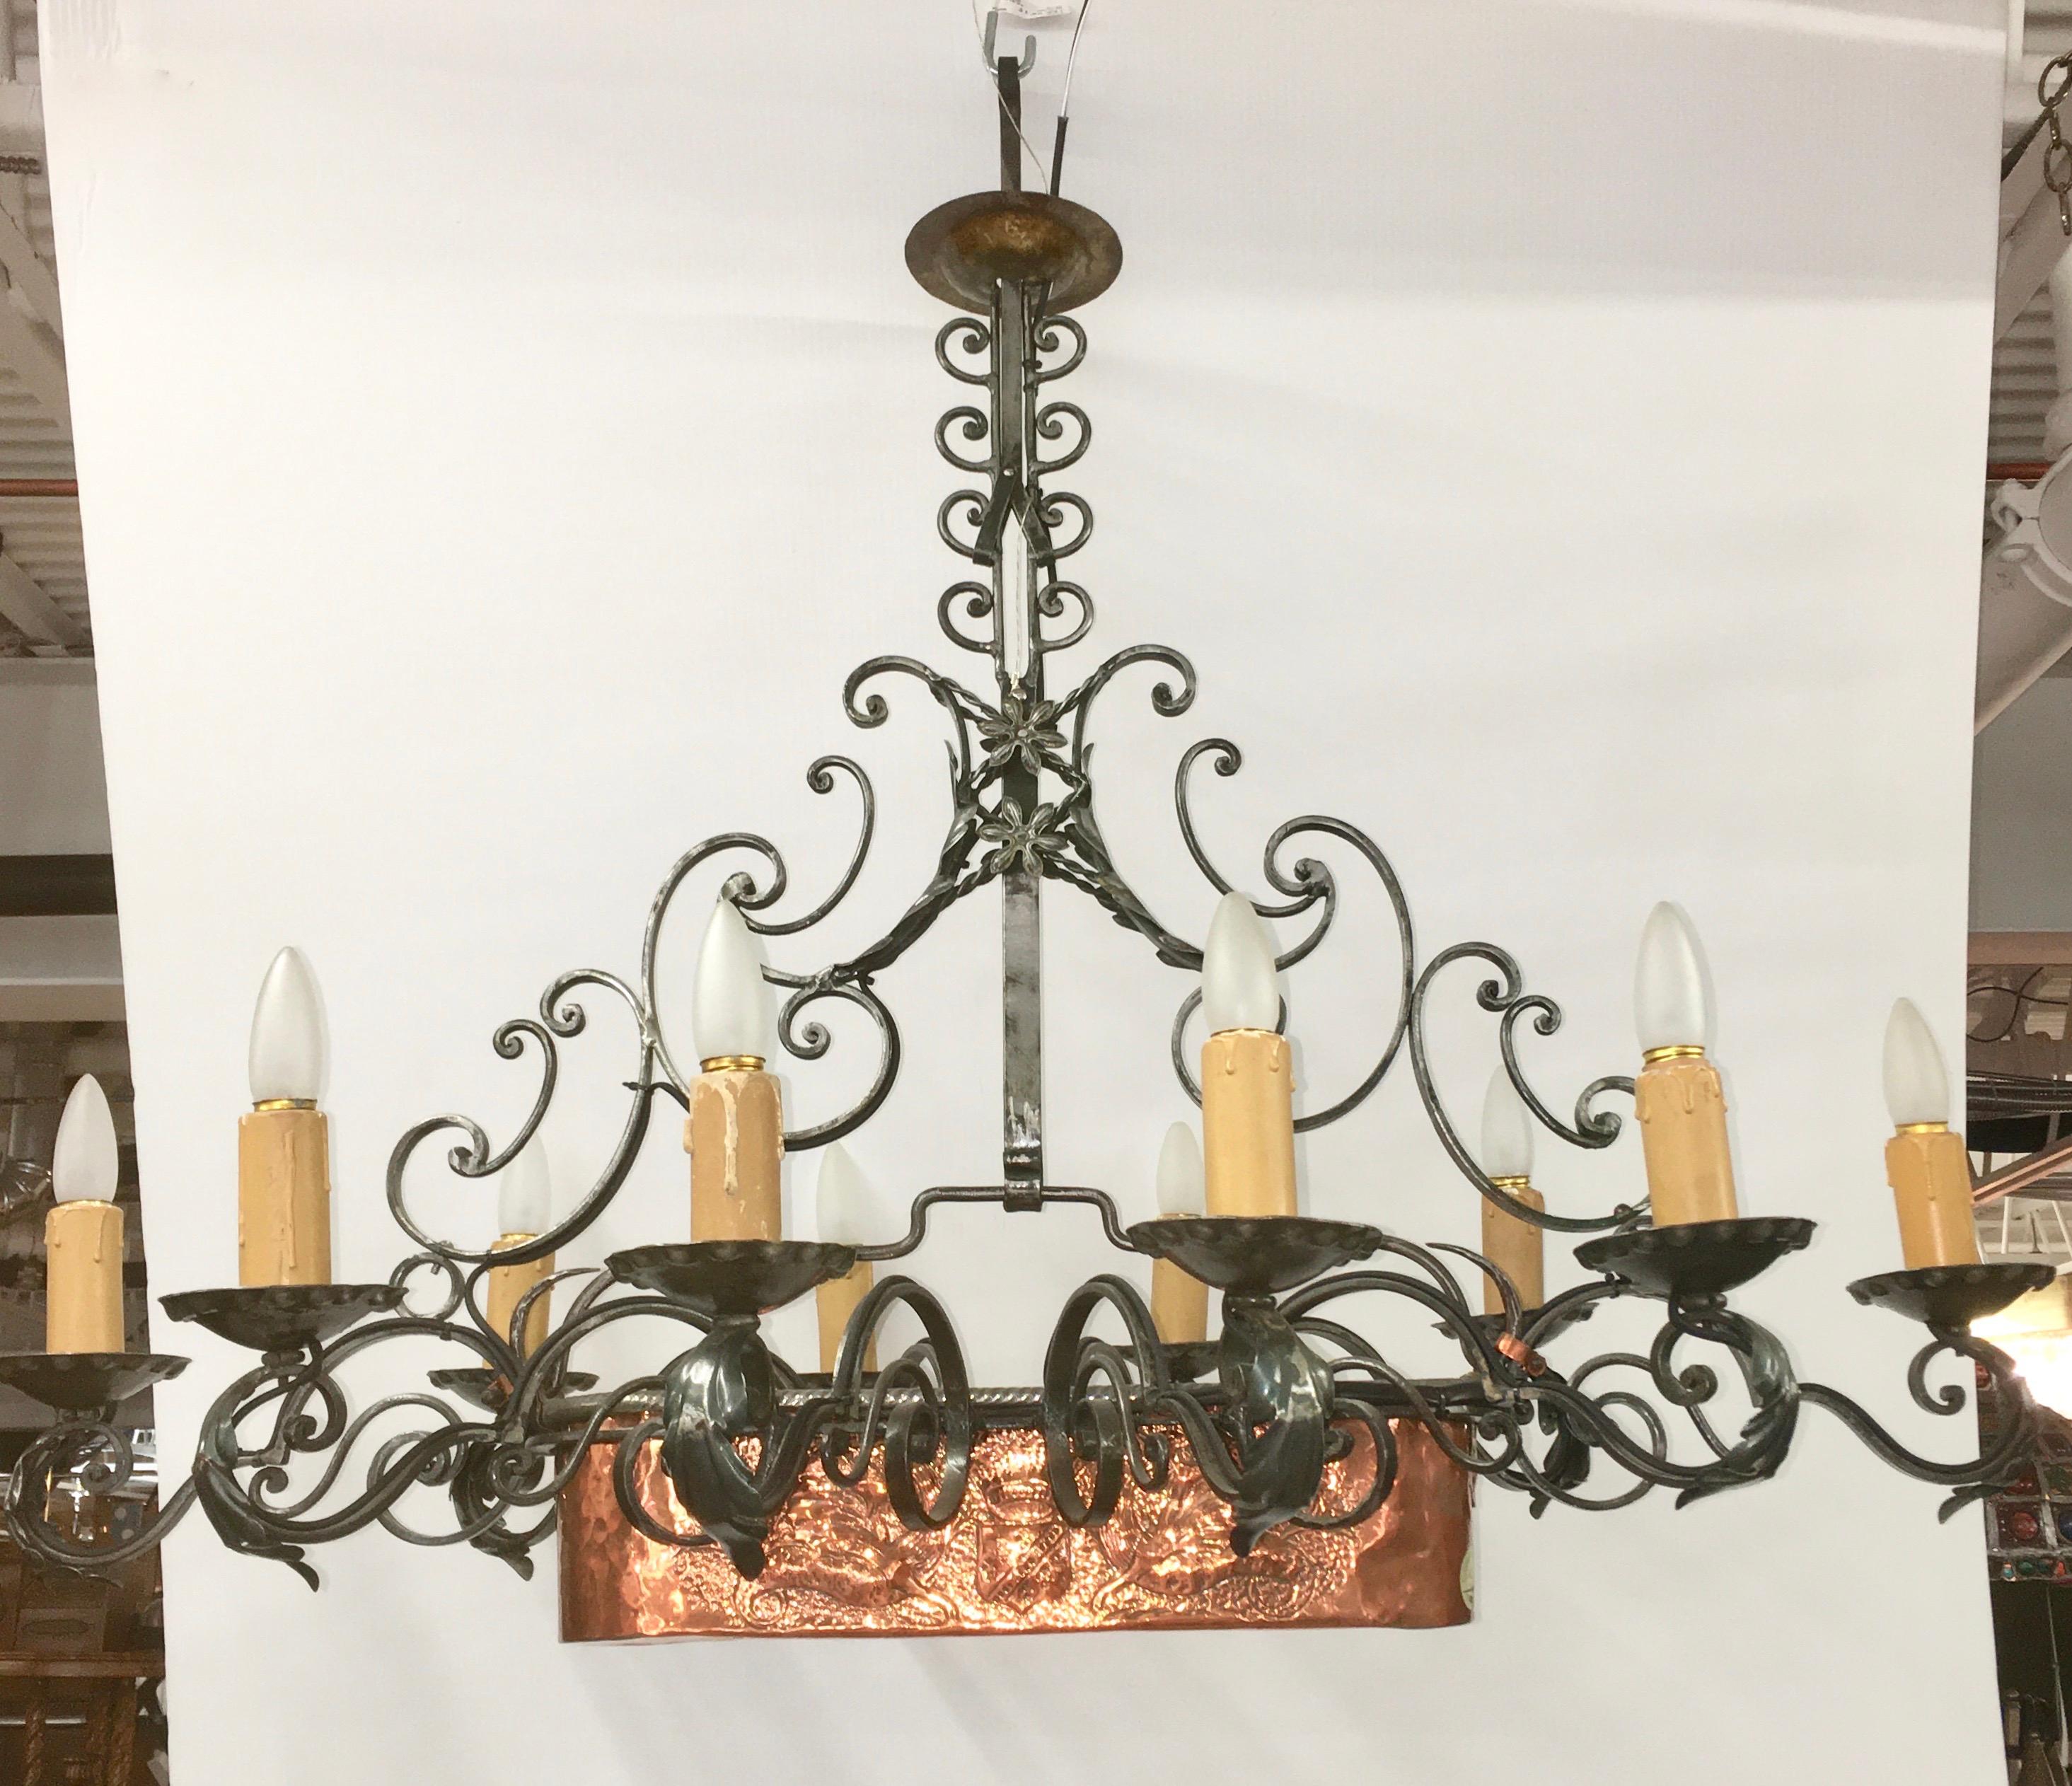 Beautifully handcrafted wrought iron chandelier on a linear rectangular axis having ten lights around a fixed central planter of hand hammered copper with repousse designs of flowers on one side and the crest and shield of a noble family on the